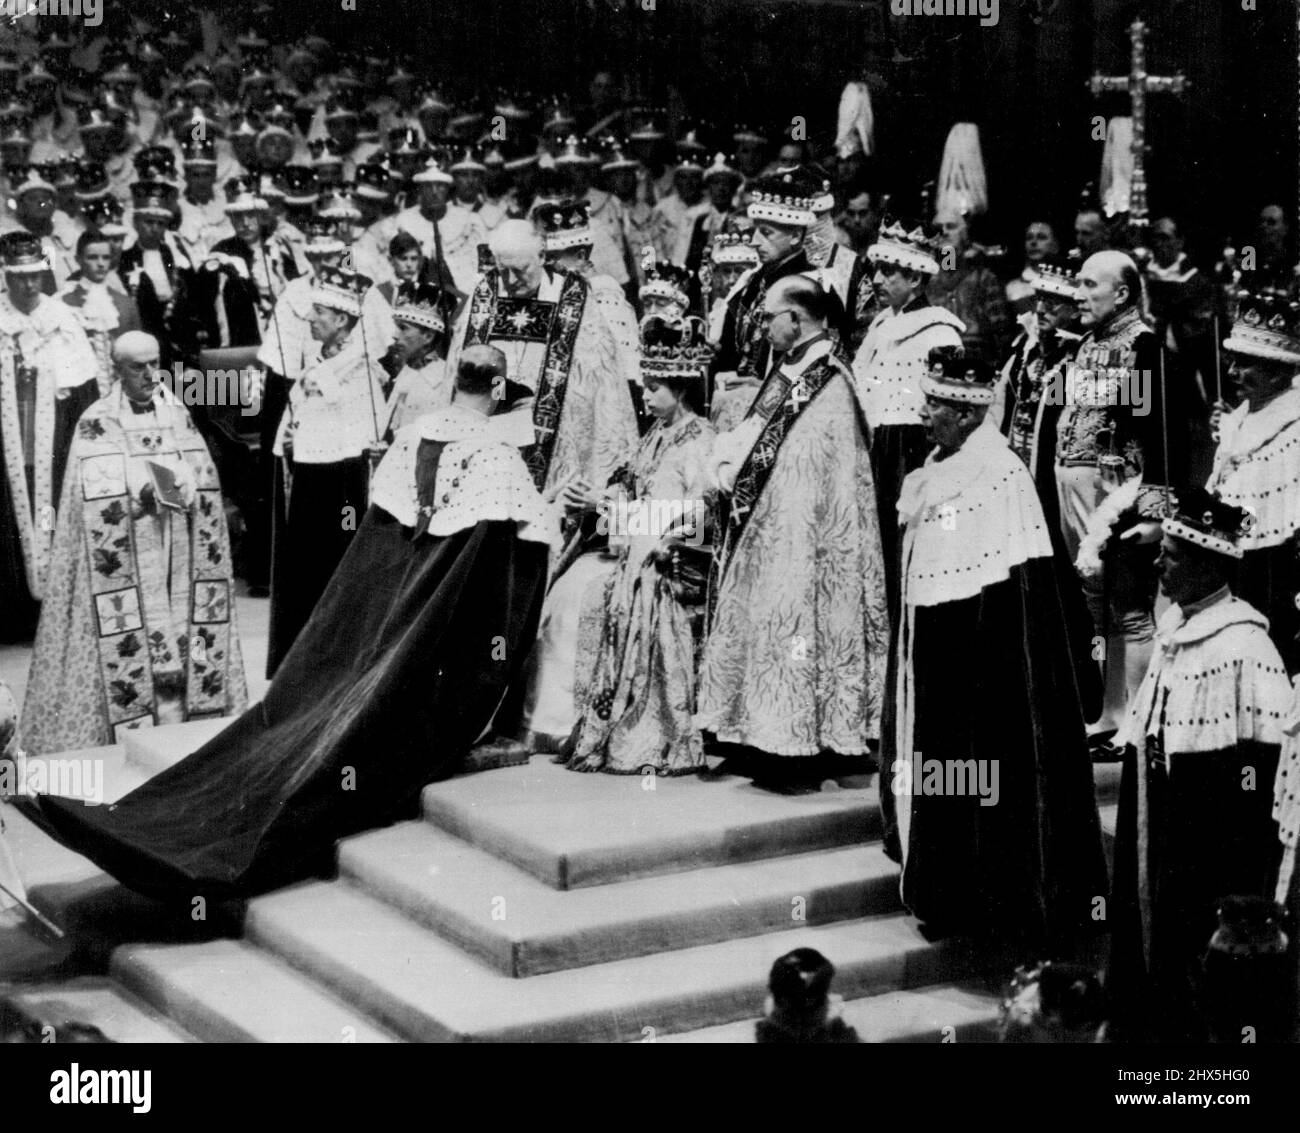 Duke Pays Homage To His Wife, The Queen - The Duke of Edinburgh kneels before the throne and pays hoamge to his wife Queen Elizabeth II, in Westminster Abbey after her coronation yesterday. Churchman at left, holding book, is the Archbishop of Canterbury. Flanking the Queen are the Bishop of Durham, left, and the Bishop of Bath and Wells. Others surrounding throne are unidentified peers and churchmen. June 03, 1953. (AP Wirephoto). Stock Photo